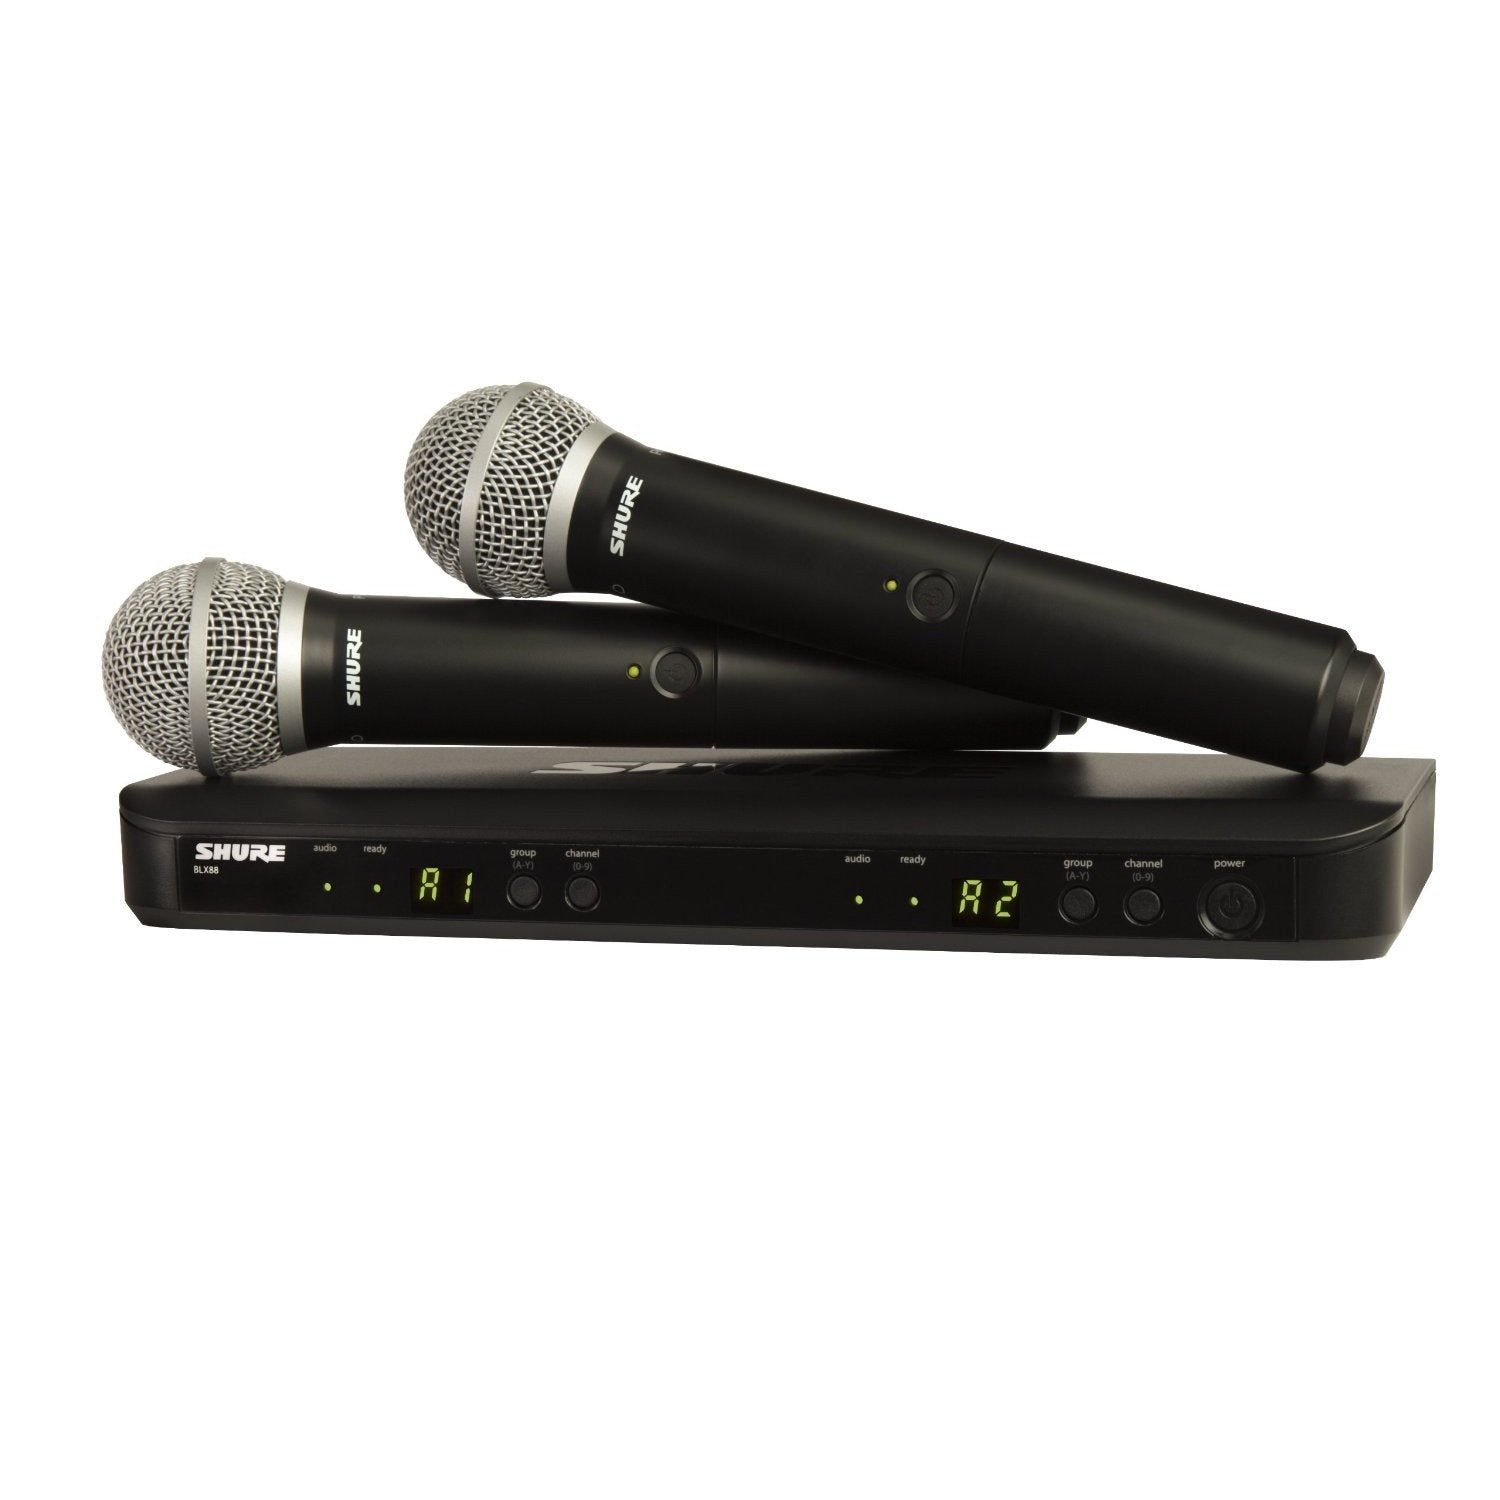 Shure BLX288, PG58 Wireless Vocal Combo with PG58 Handheld Microphones